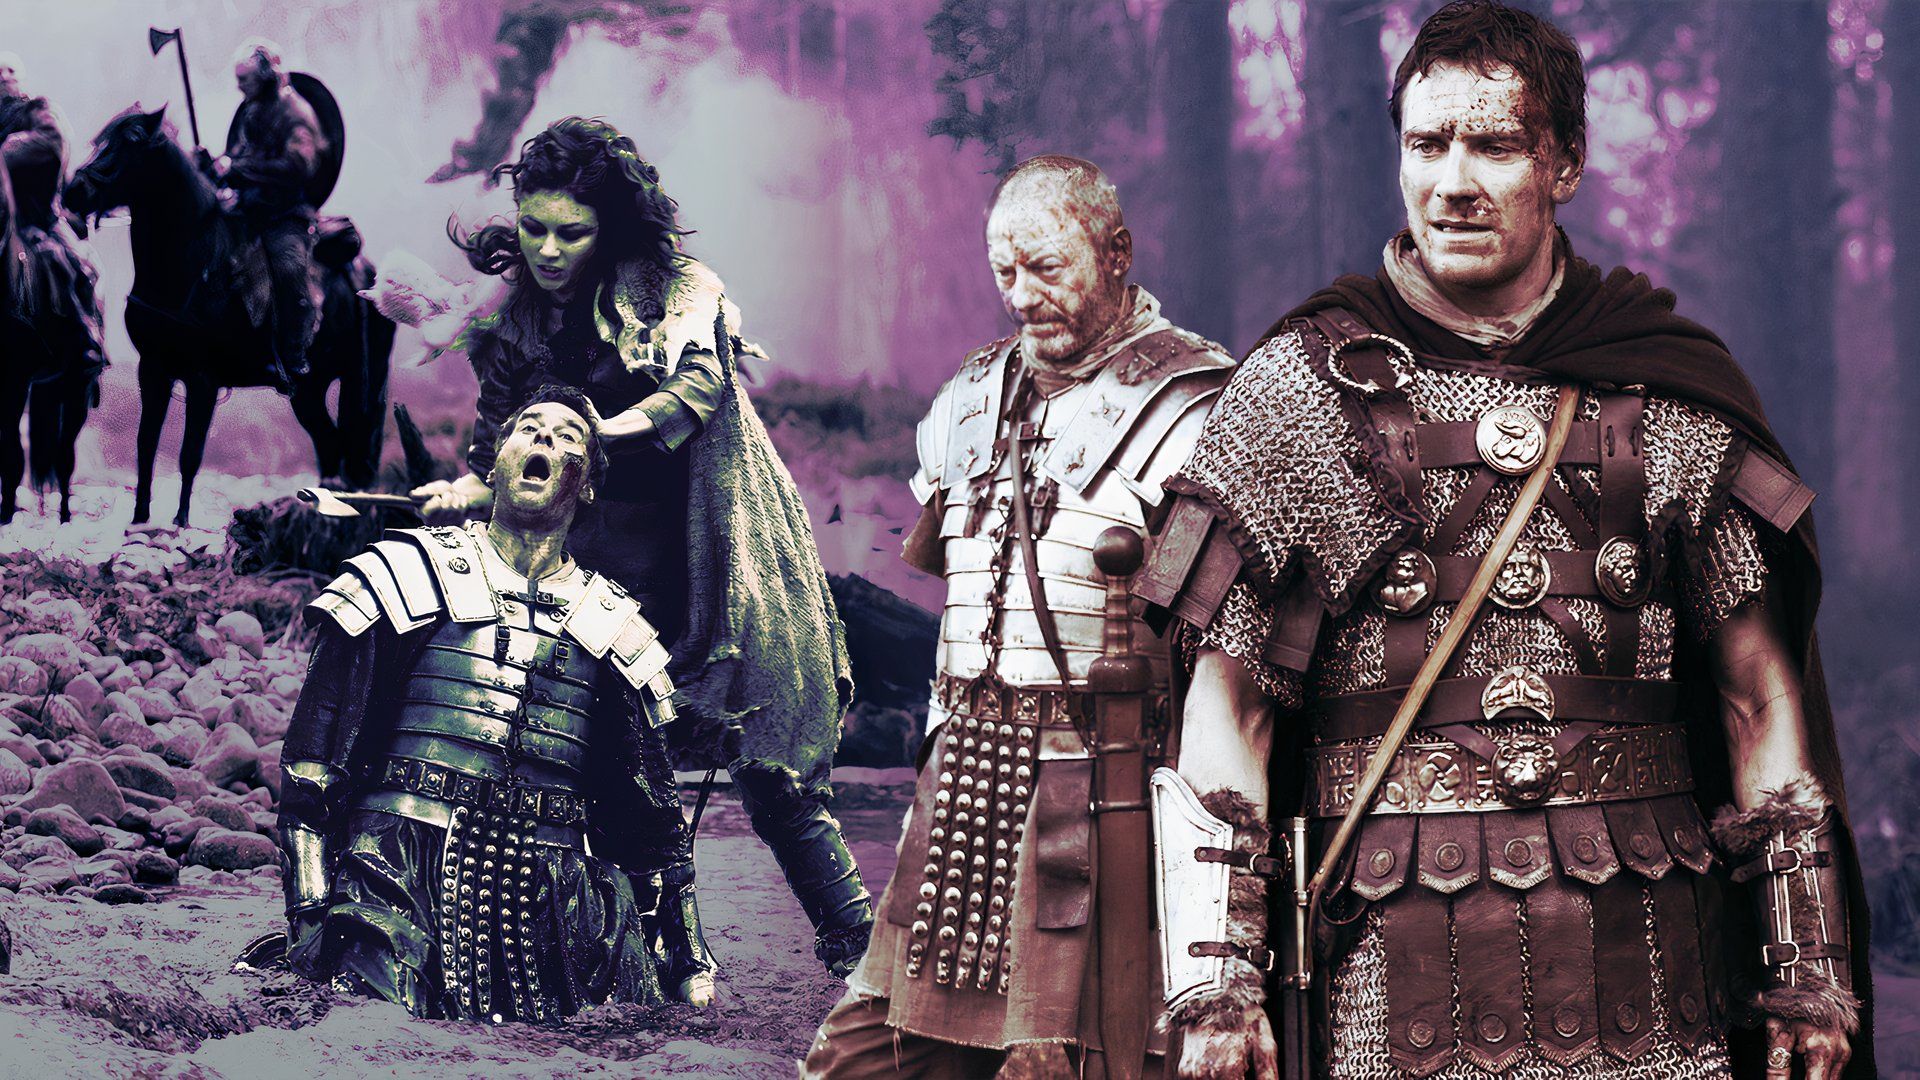 An edited image of Michael Fassbender and Liam Cunningham in armor in the woods in Centurion